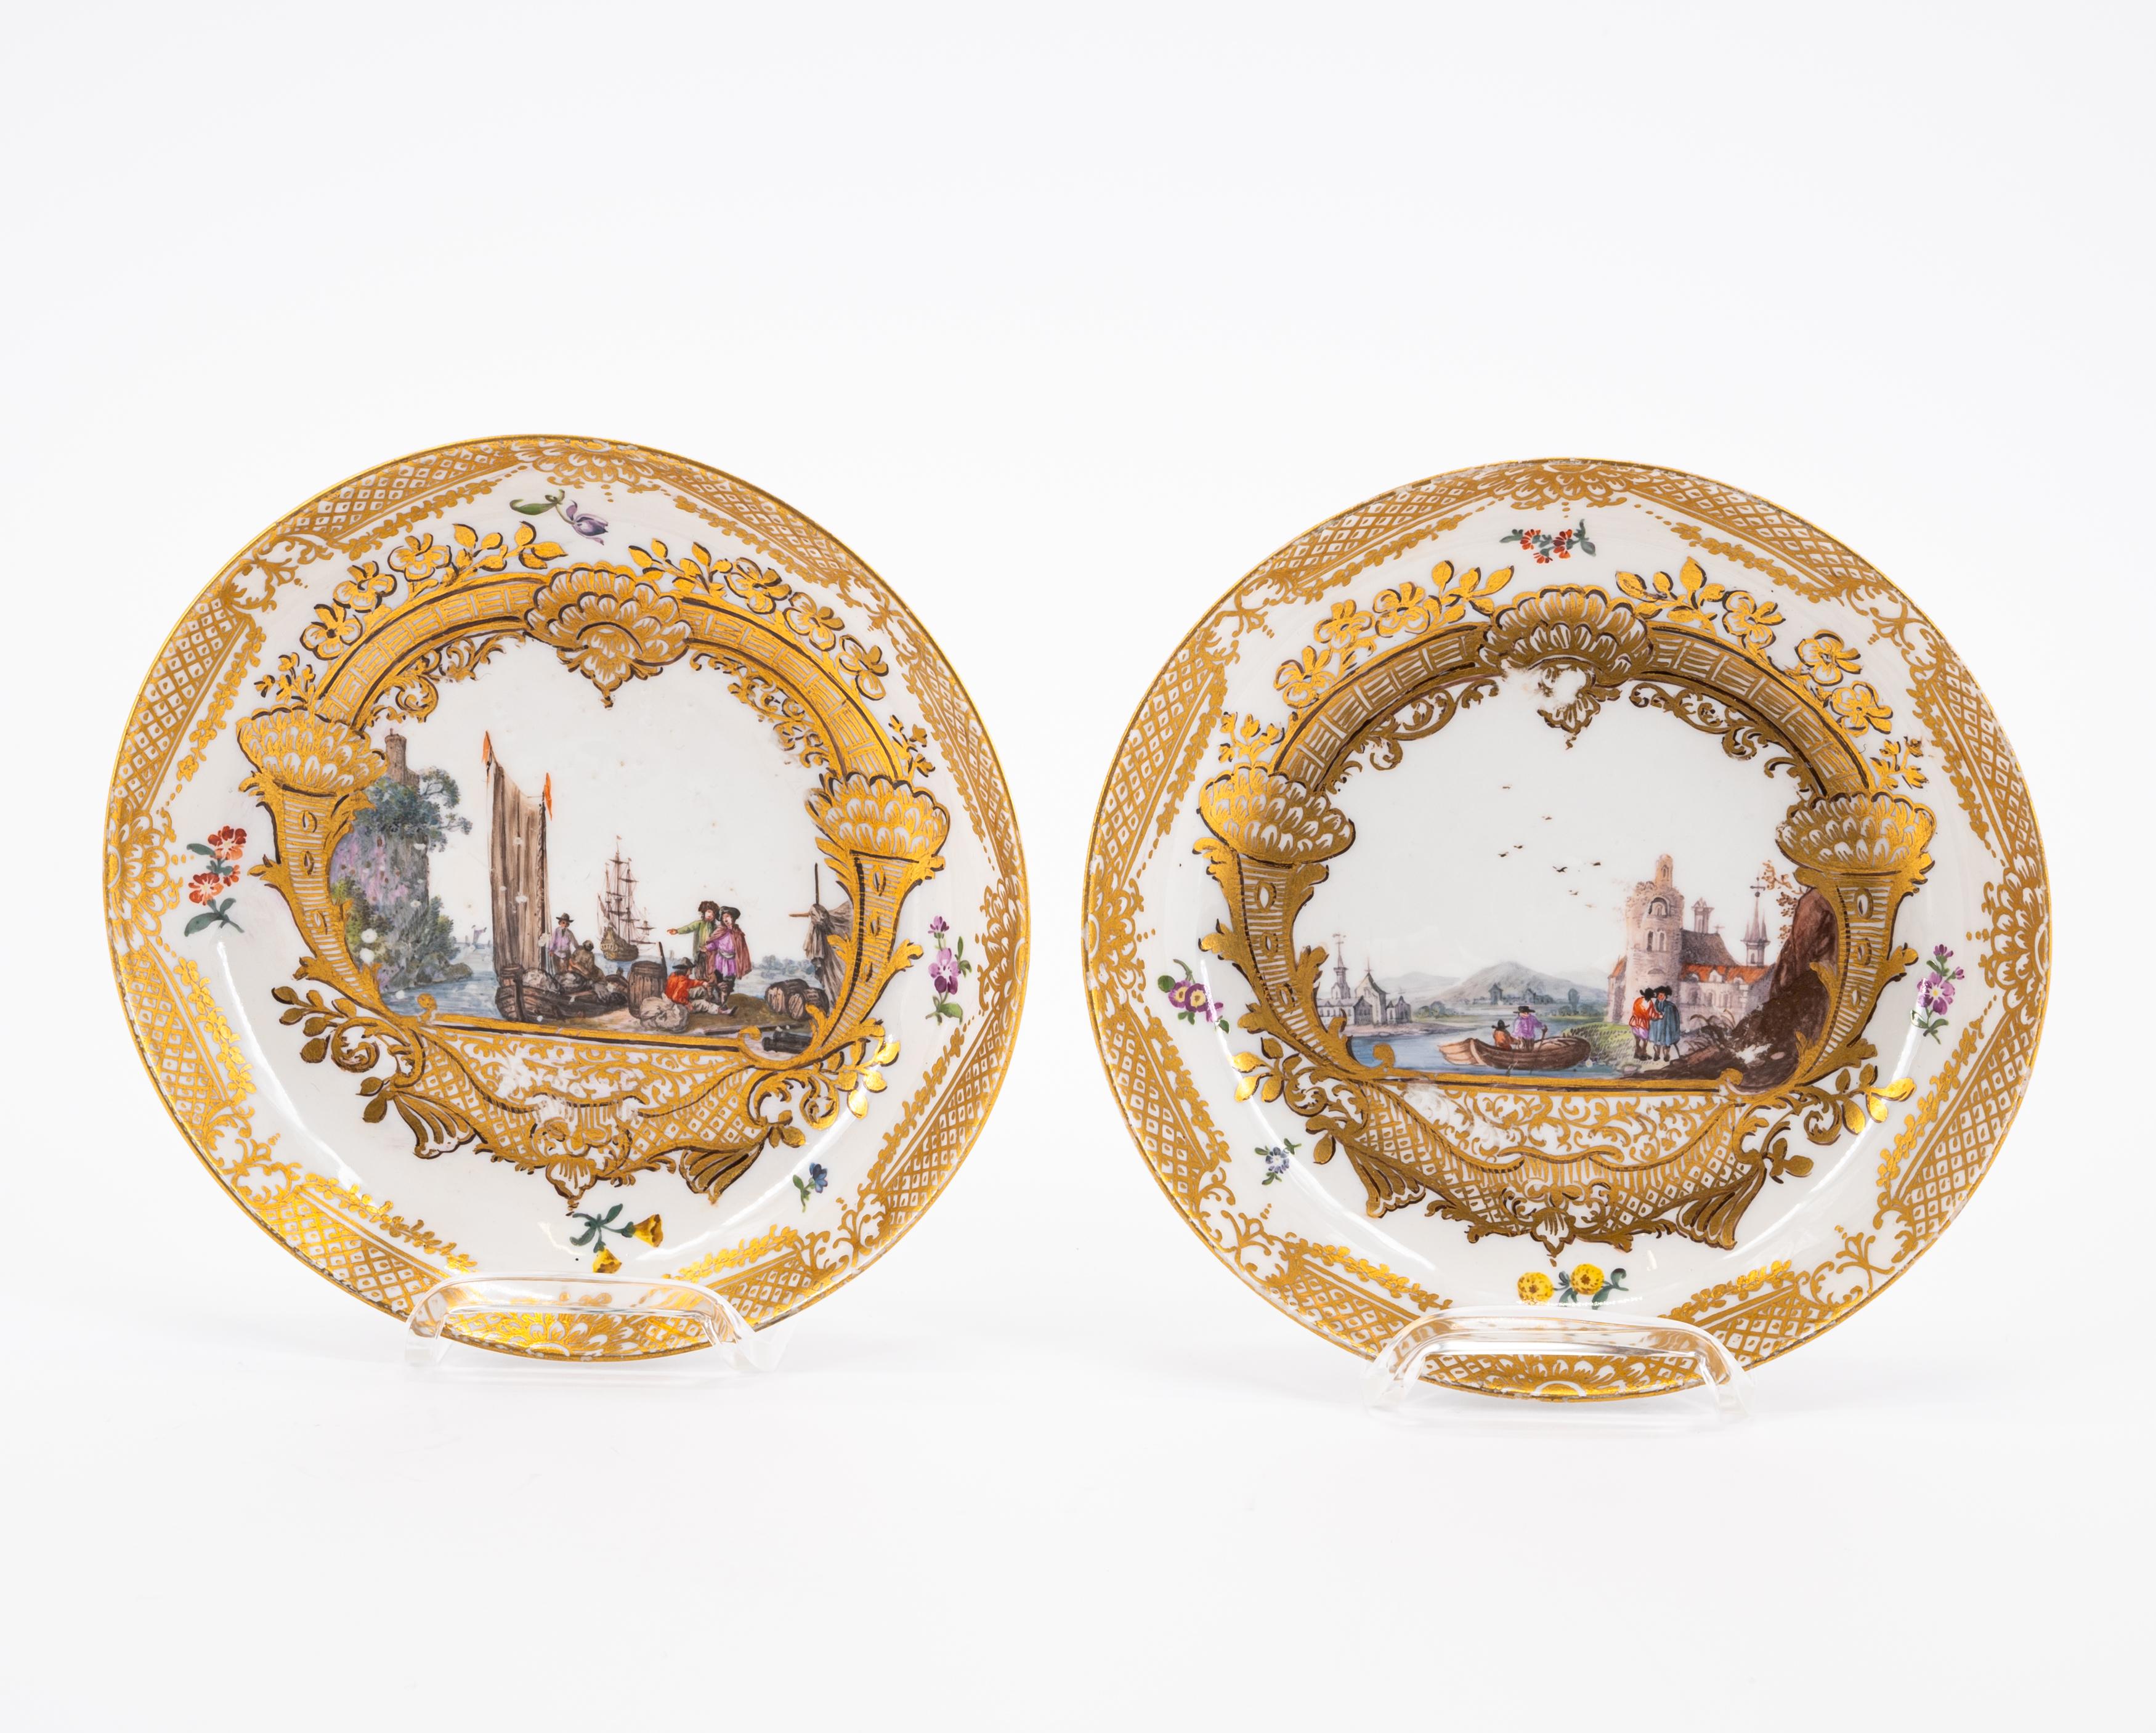 FOUR SMALL PORCELAIN PLATES WITH GOLD CONTOURED WATTEAU SCENES OUTLINES - Image 2 of 5